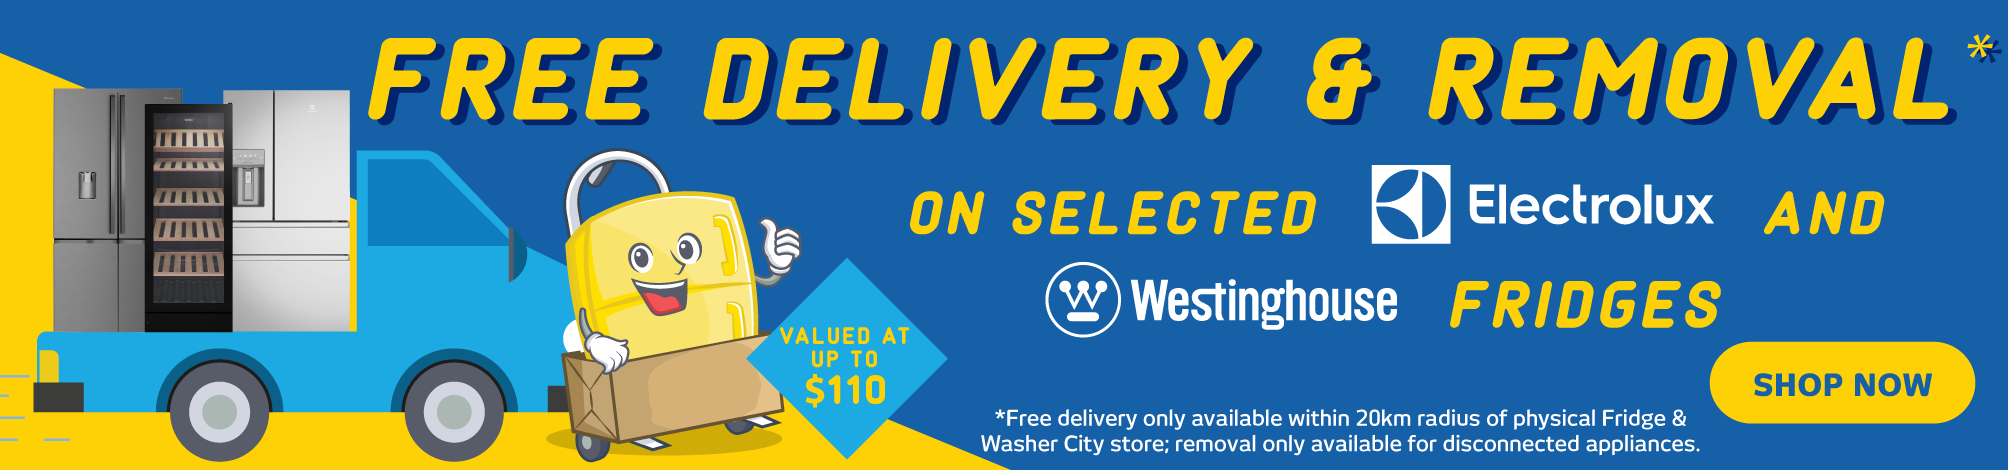 Free Delivery & Removal With Electrolux & Westinghouse Fridges